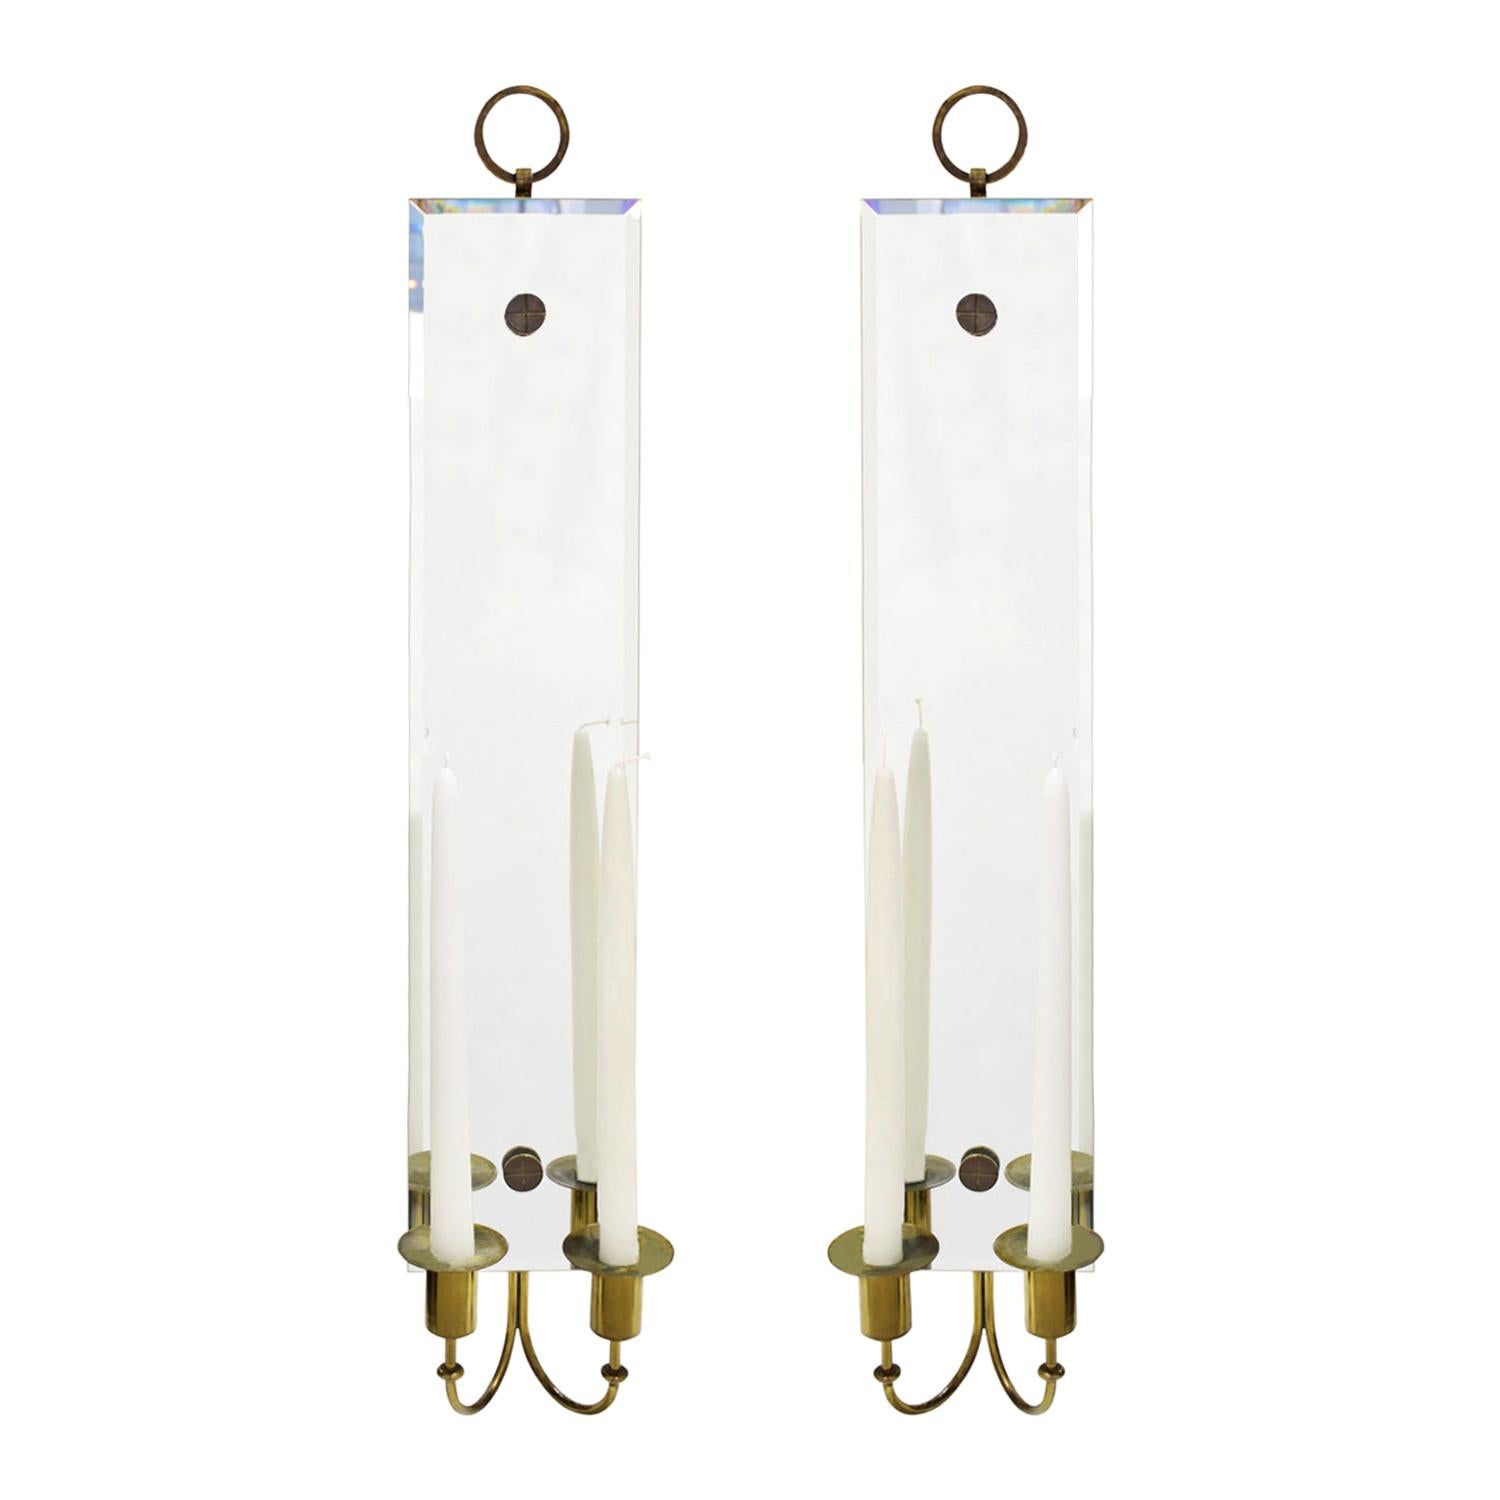 Tommi Parzinger Pair of Mirrored Sconces with Brass Candleholders, 1950s